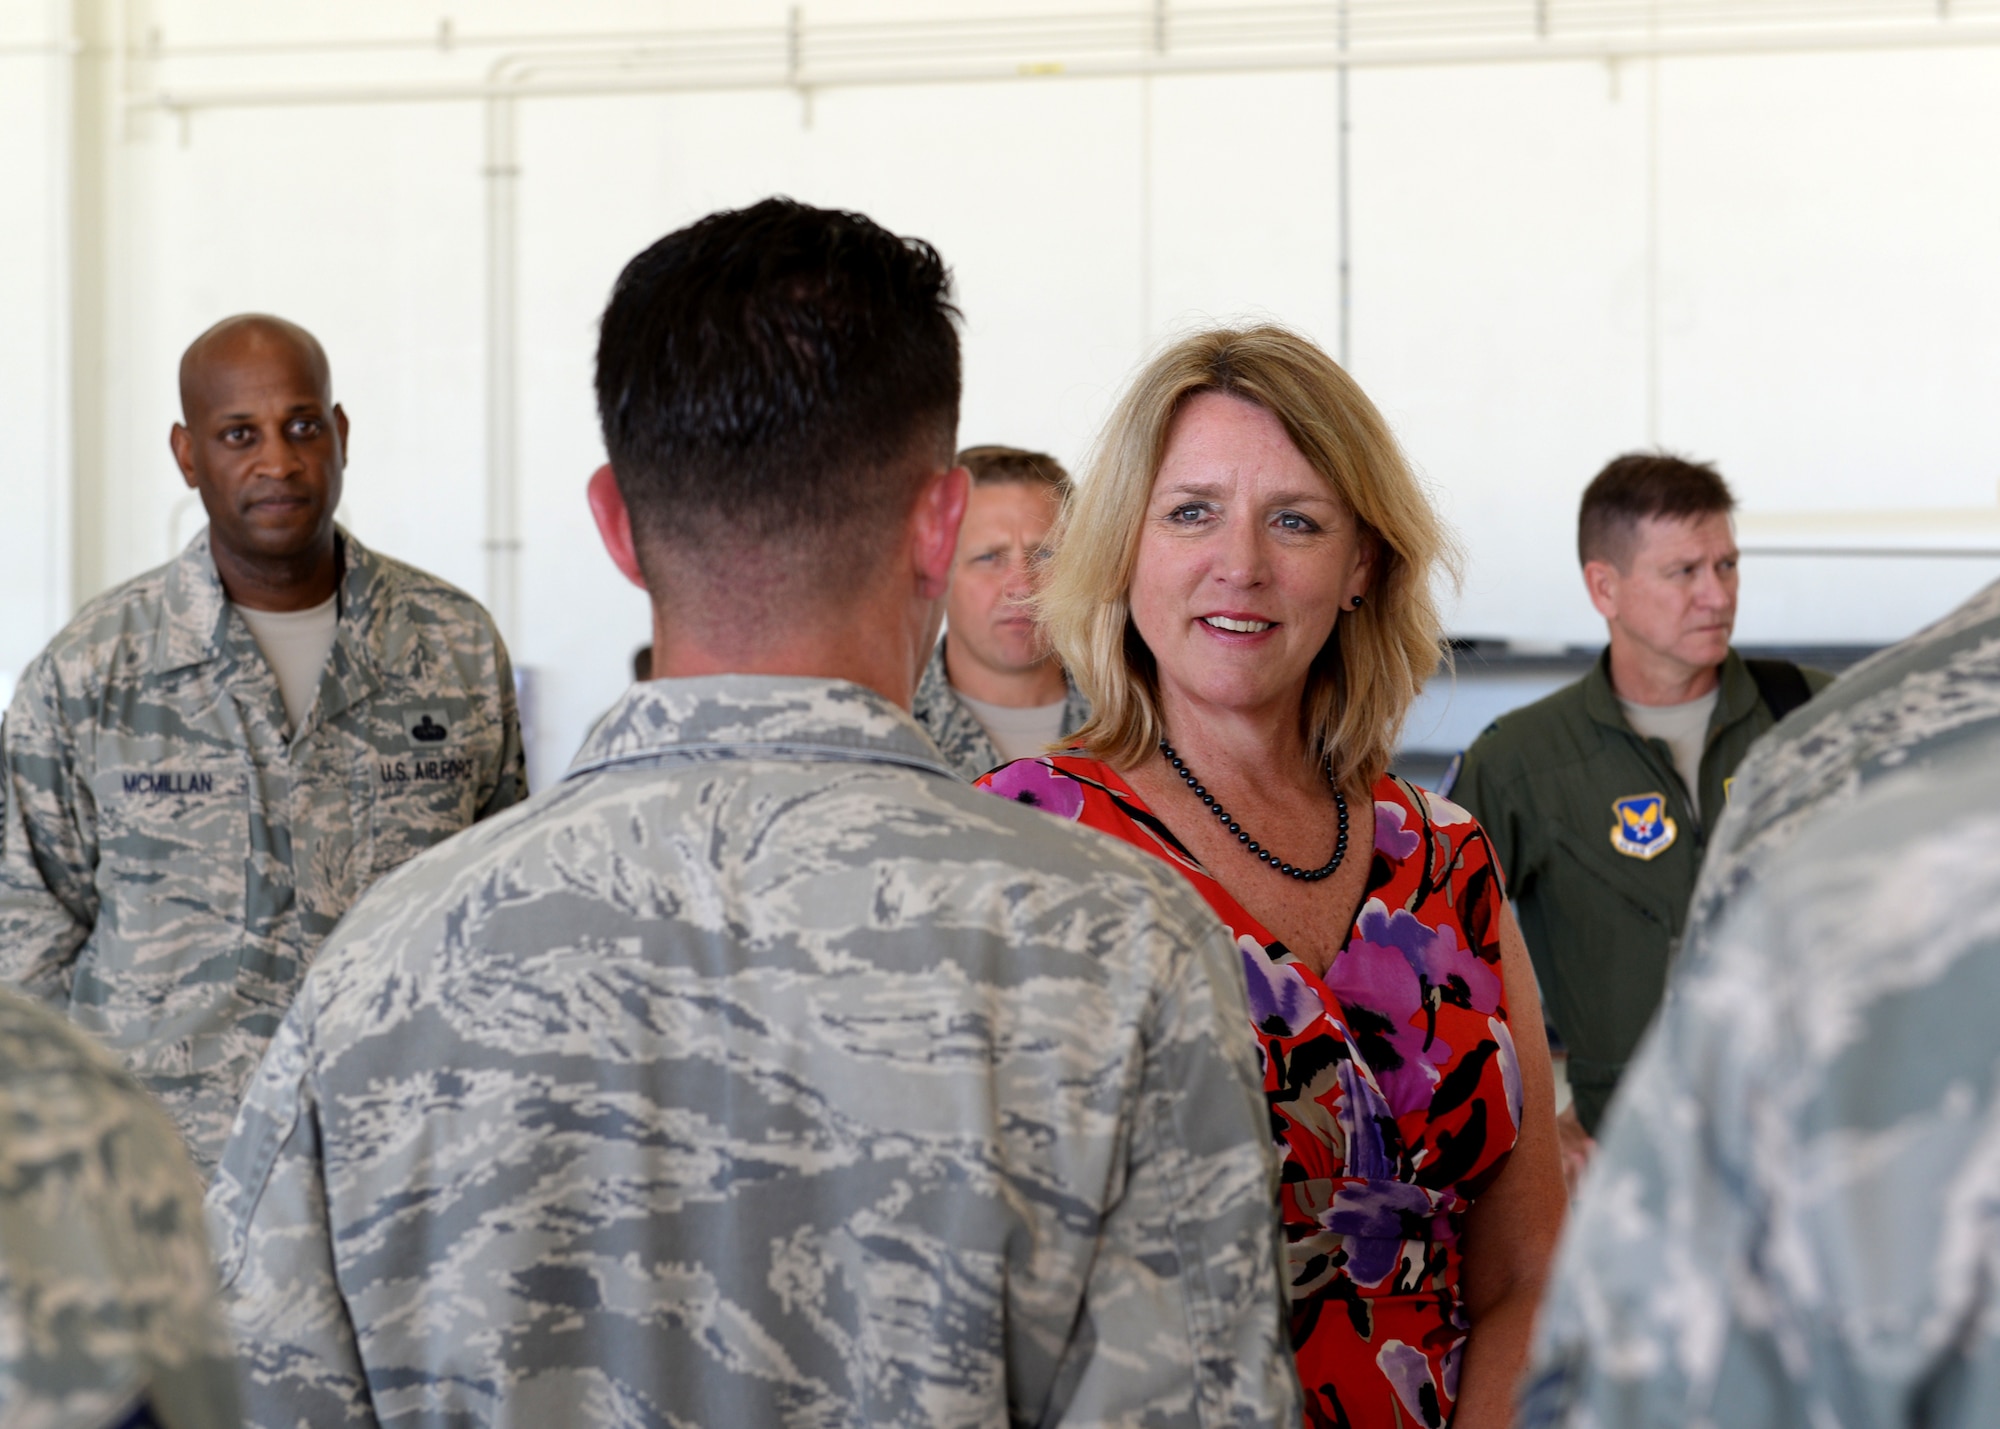 Secretary of the Air Force Deborah Lee James learns about RQ-4A Global Hawk mission capabilities from talking with 69th Reconnaissance Squadron, Detachment 2 Airmen Nov. 19, 2014, at Andersen Air Force Base, Guam. The secretary met and discussed Air Force policies and goals with Airmen and local community leaders during her two-day visit to Andersen and received a firsthand look at the base's critical role in the strategic Pacific rebalance. (U.S. Air Force photo/Airman 1st Class Amanda Morris)